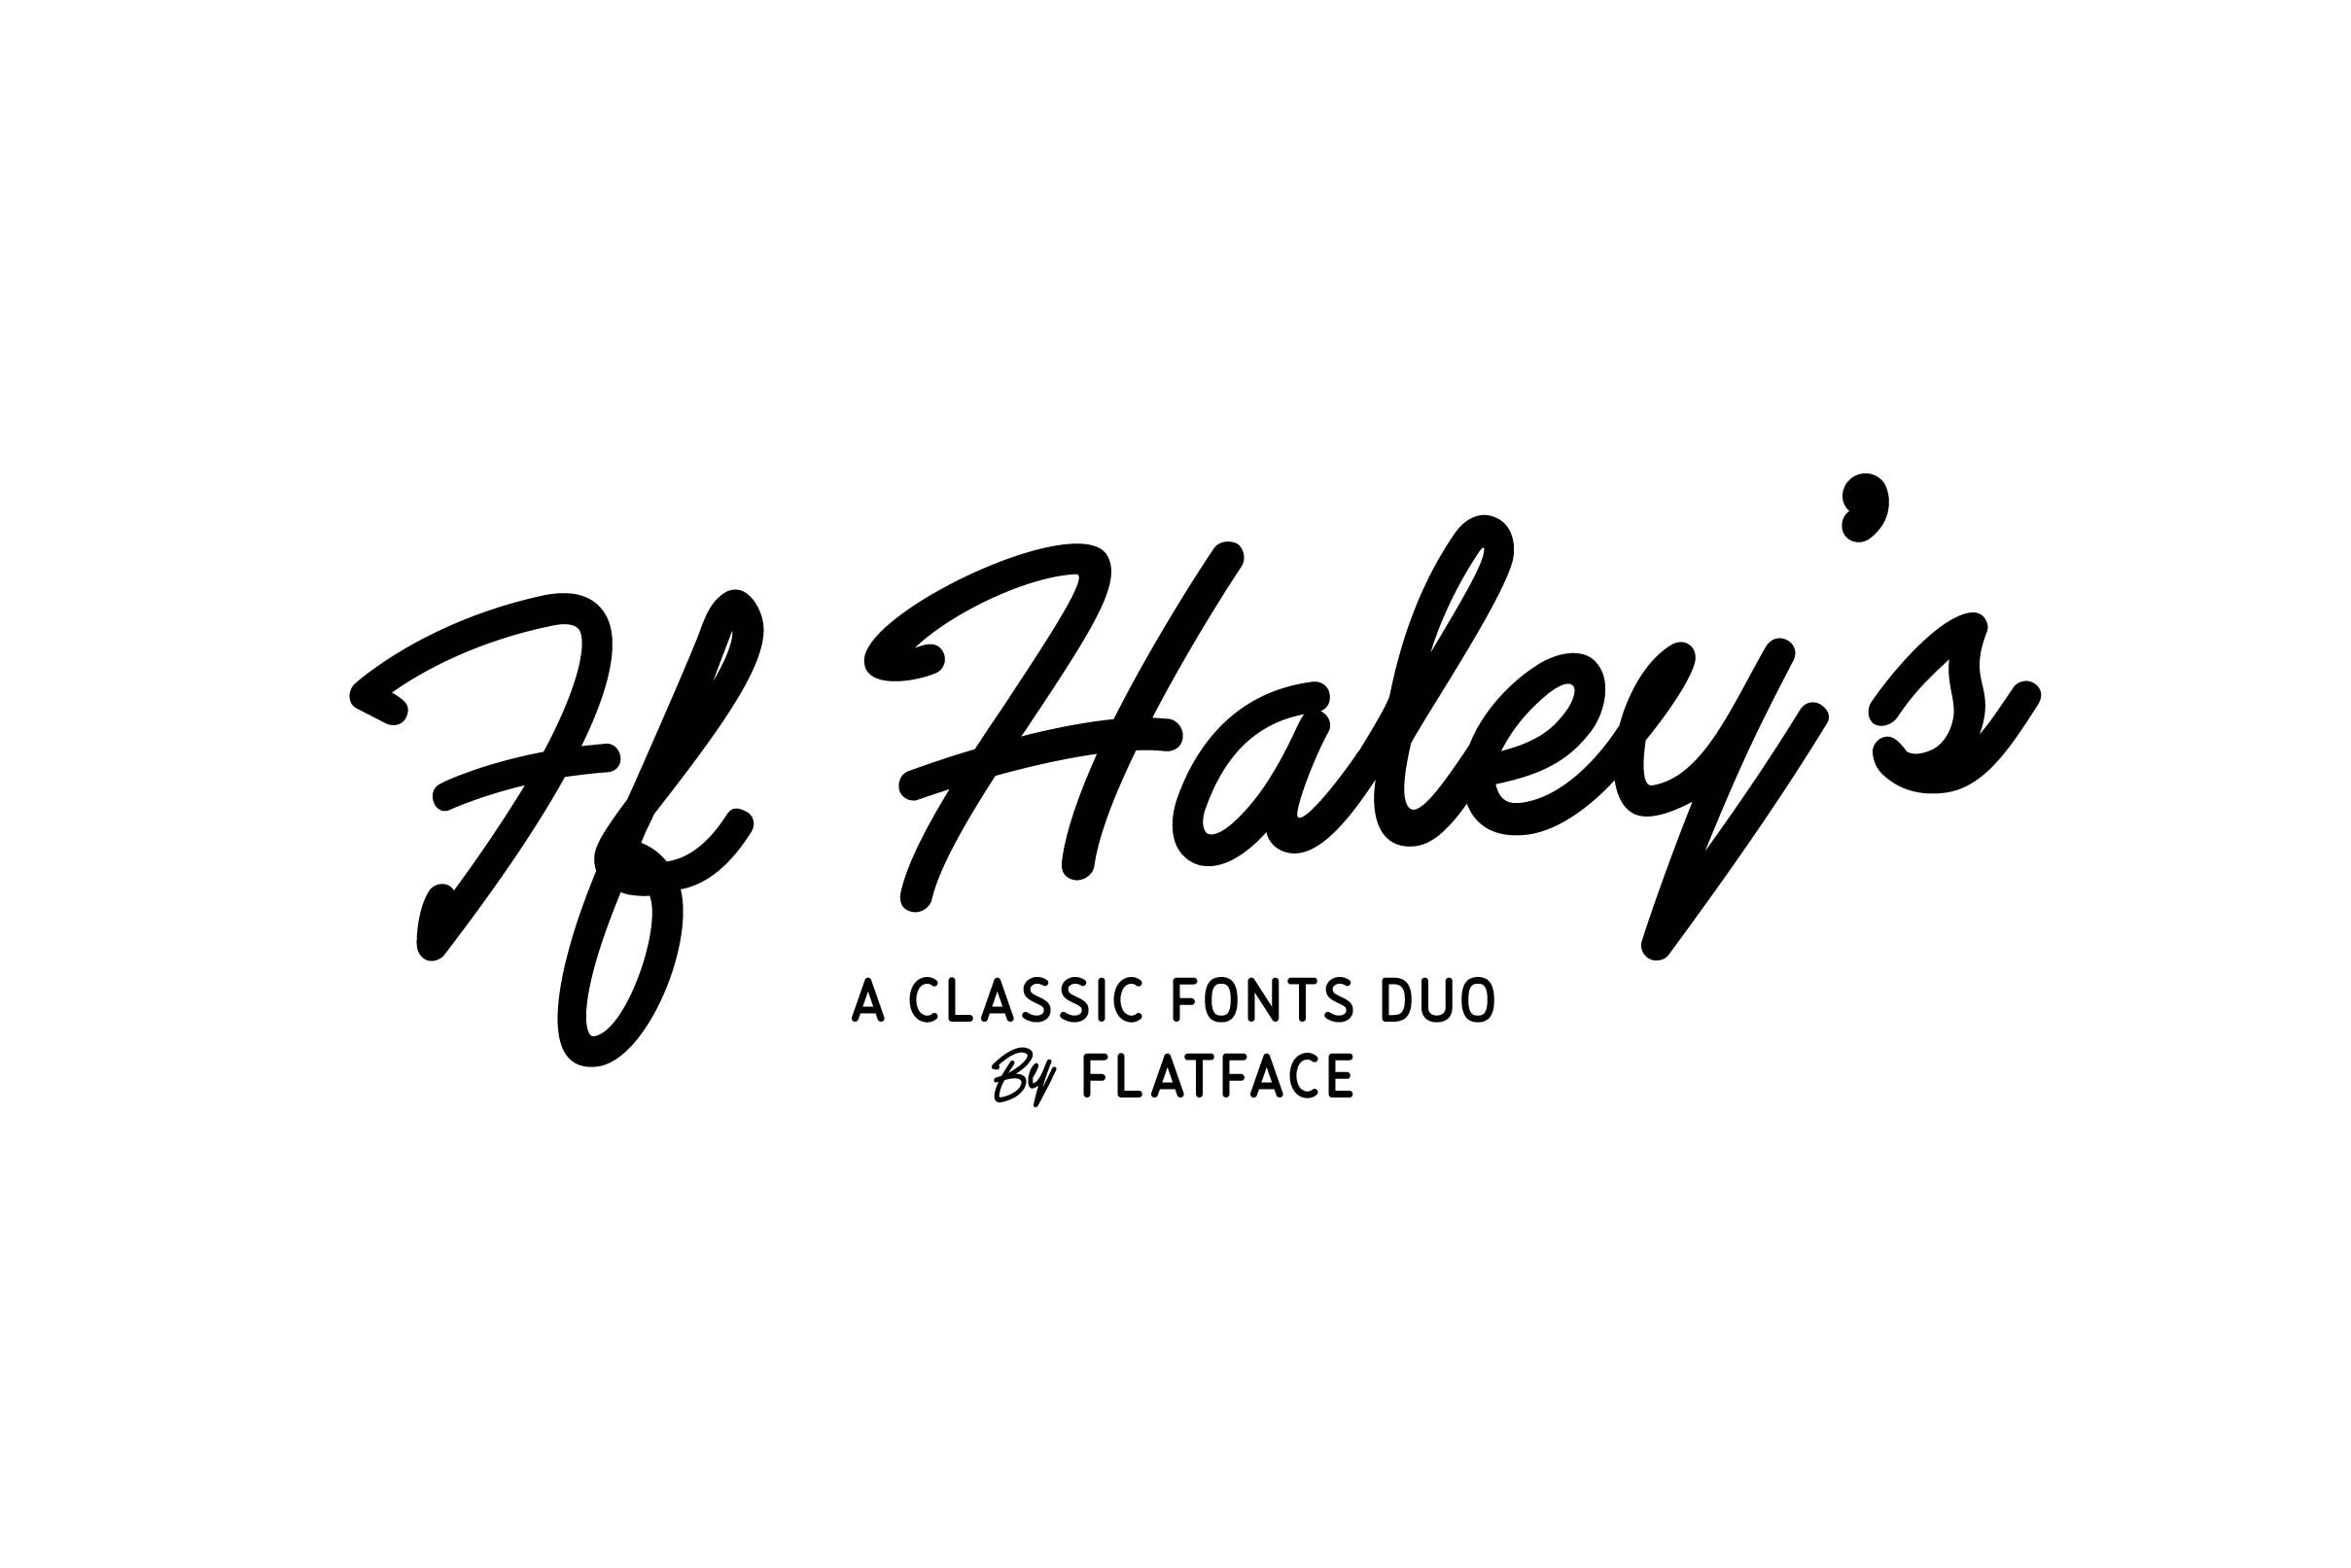 Flatface Haley's cover image.